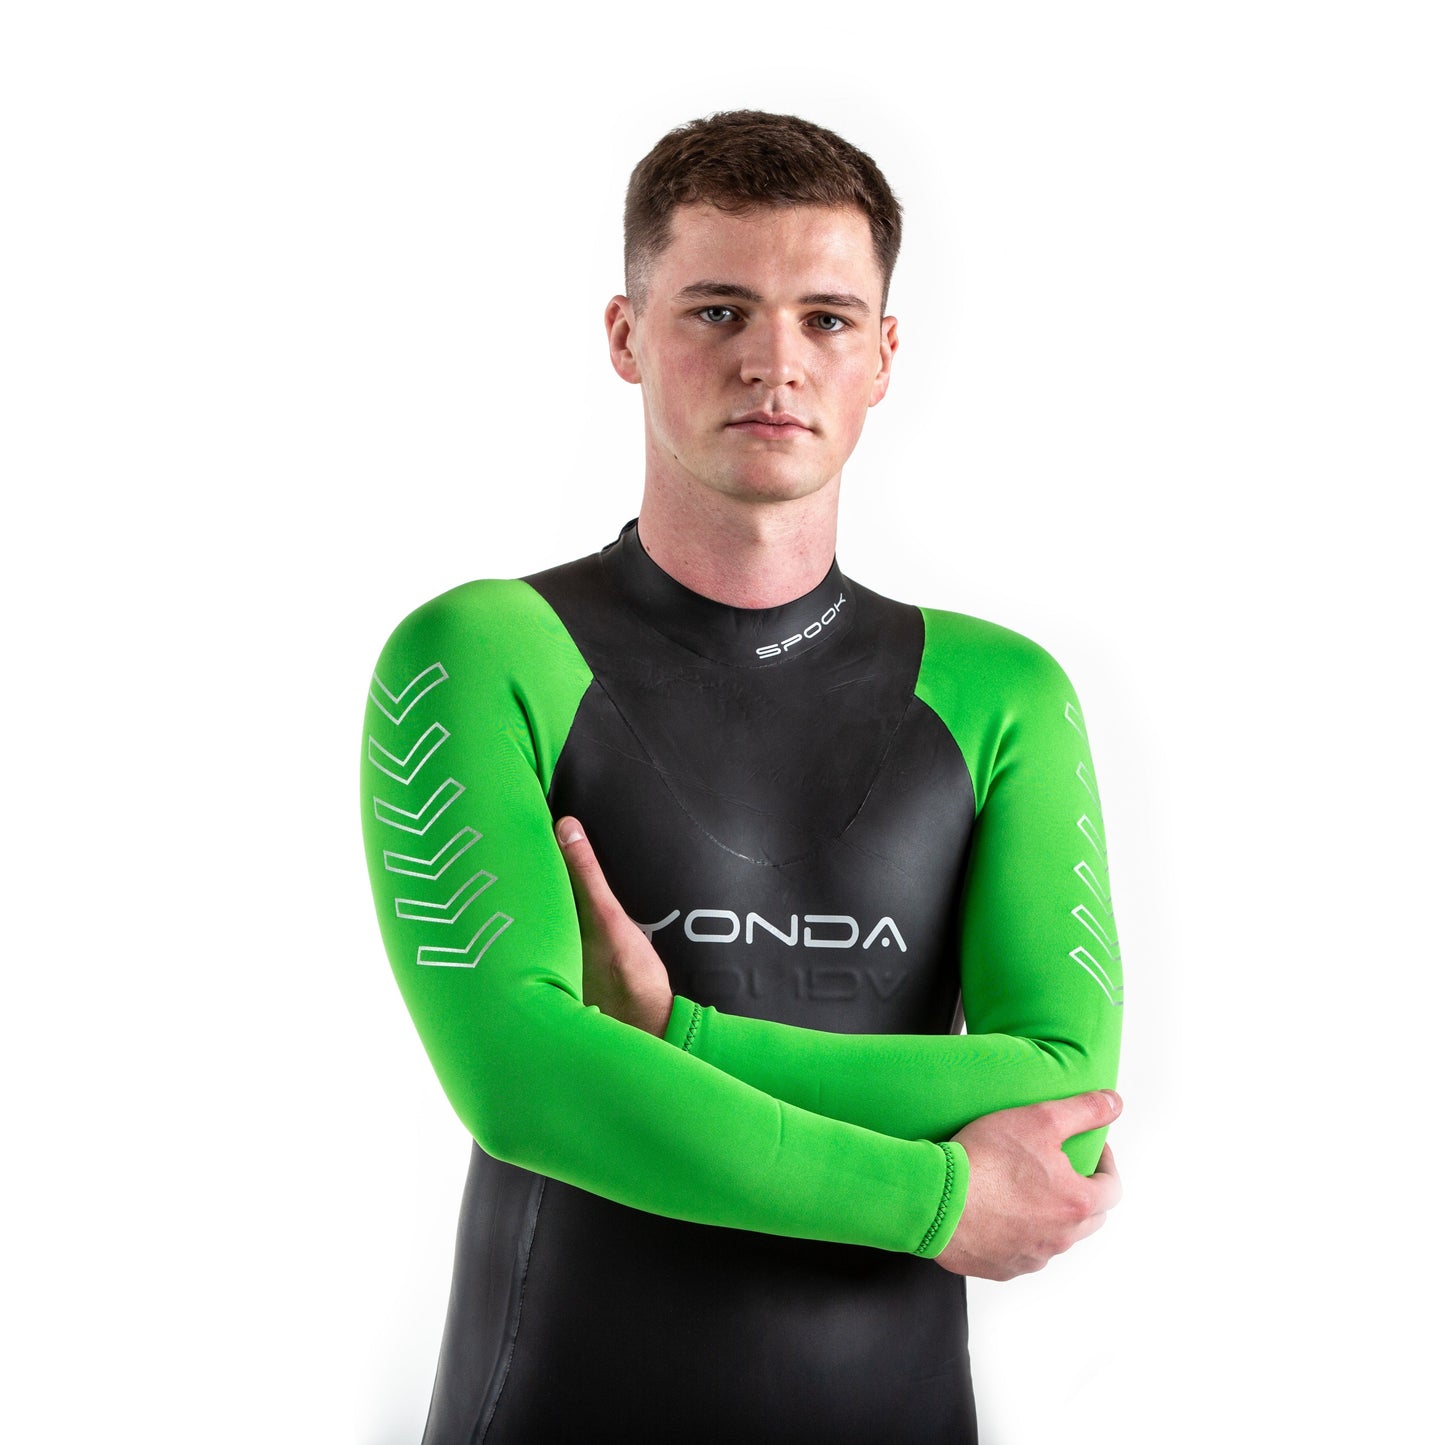 Man with arms crossed, facing the camera. He is wearing the Spook Wetsuit by Yonda. It has bright green arm sleeves.